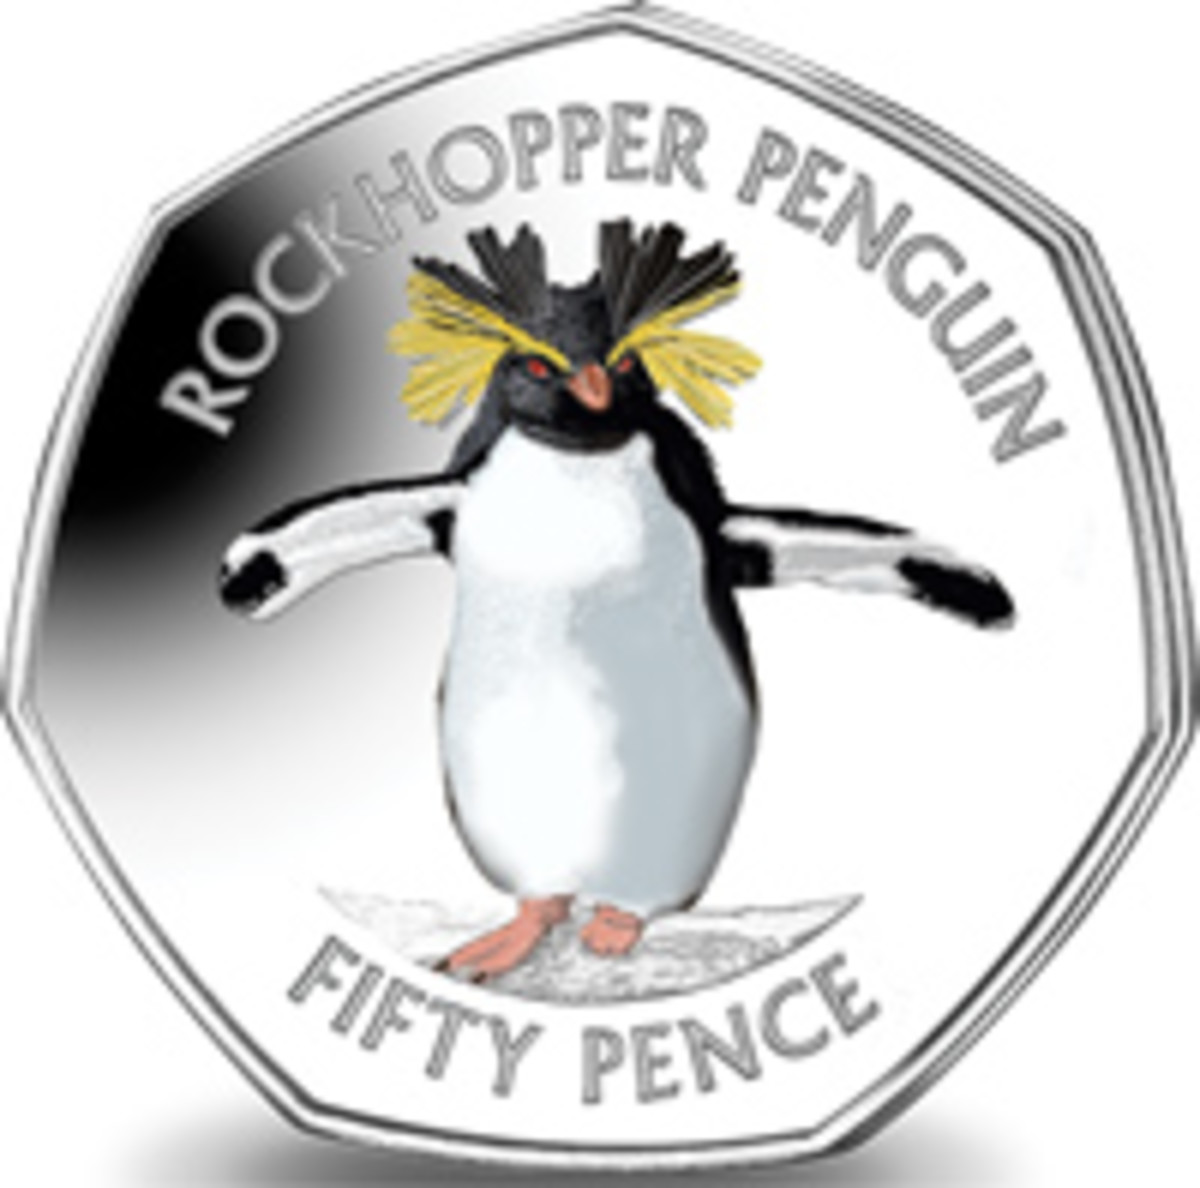  The tiny Rockhopper Penguin features on the reverse of the first coin from the Falklands Islands celebrating its indigenous penguins. (Image courtesy Pobjoy Mint)